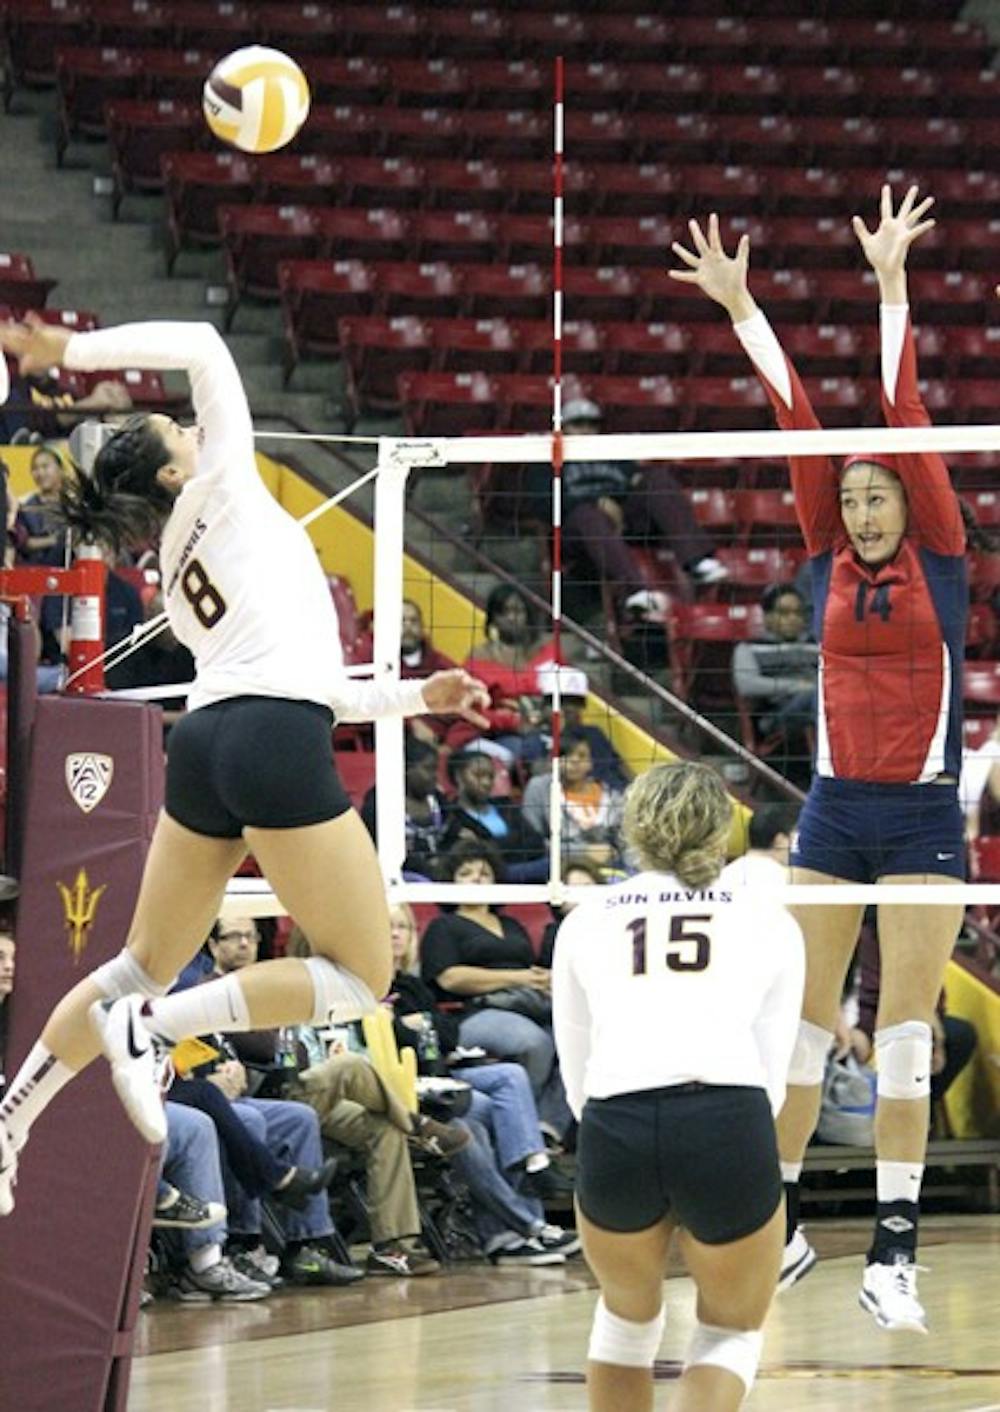 ASU outside hitter Malia Bachynski (left) extends for a spike during the Sun Devils’ 3-1 victory over UA on Saturday. The ASU volleyball team concludes the 2011 season at 9-22. (Photo by Sam Rosenbaum)